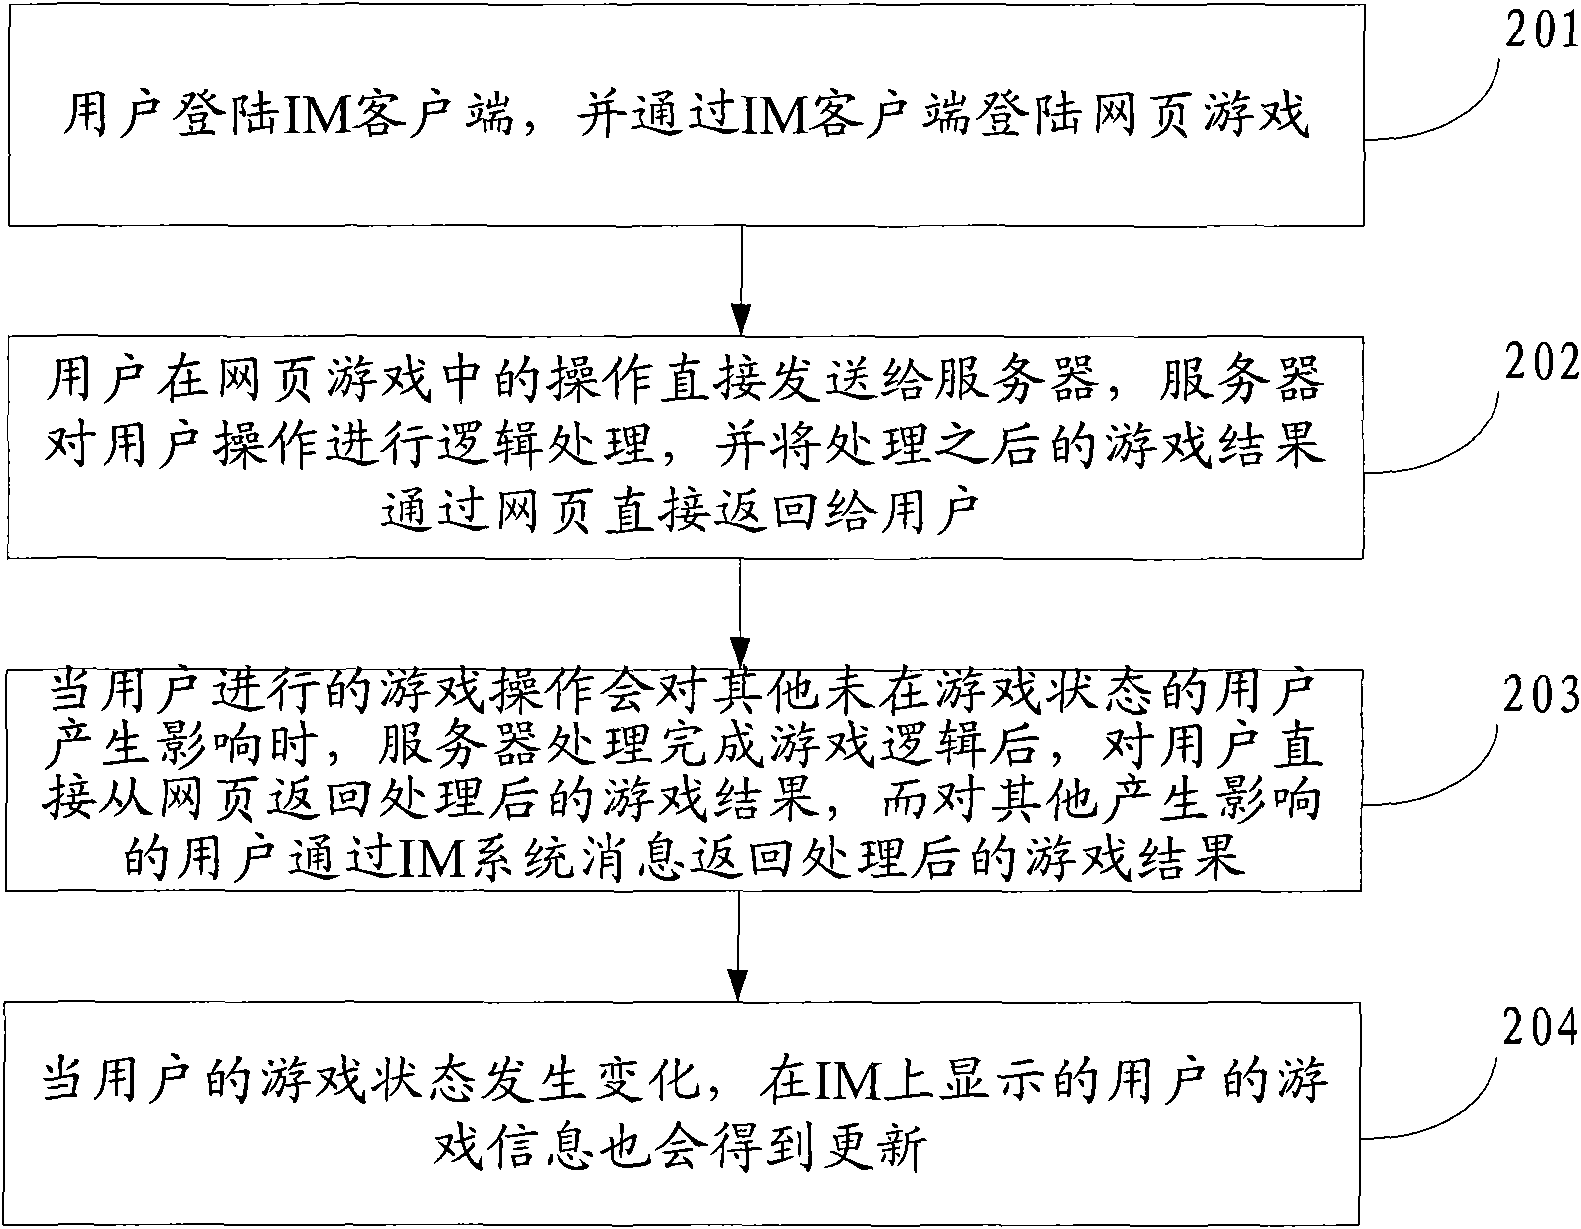 Method and system for achieving web page game